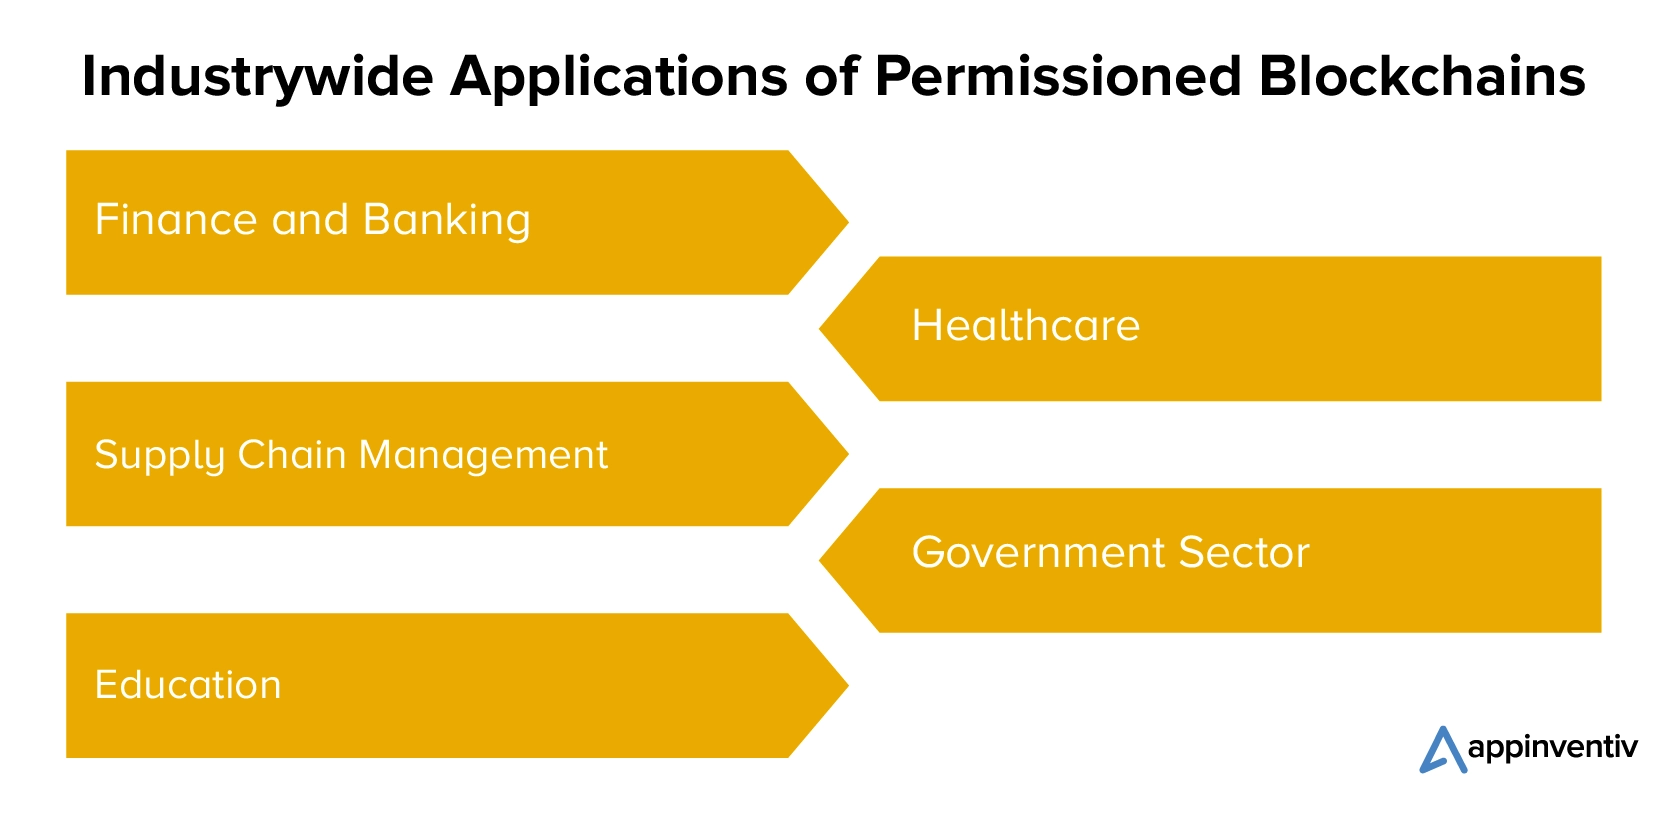 Industrywide Applications of Permissioned Blockchains